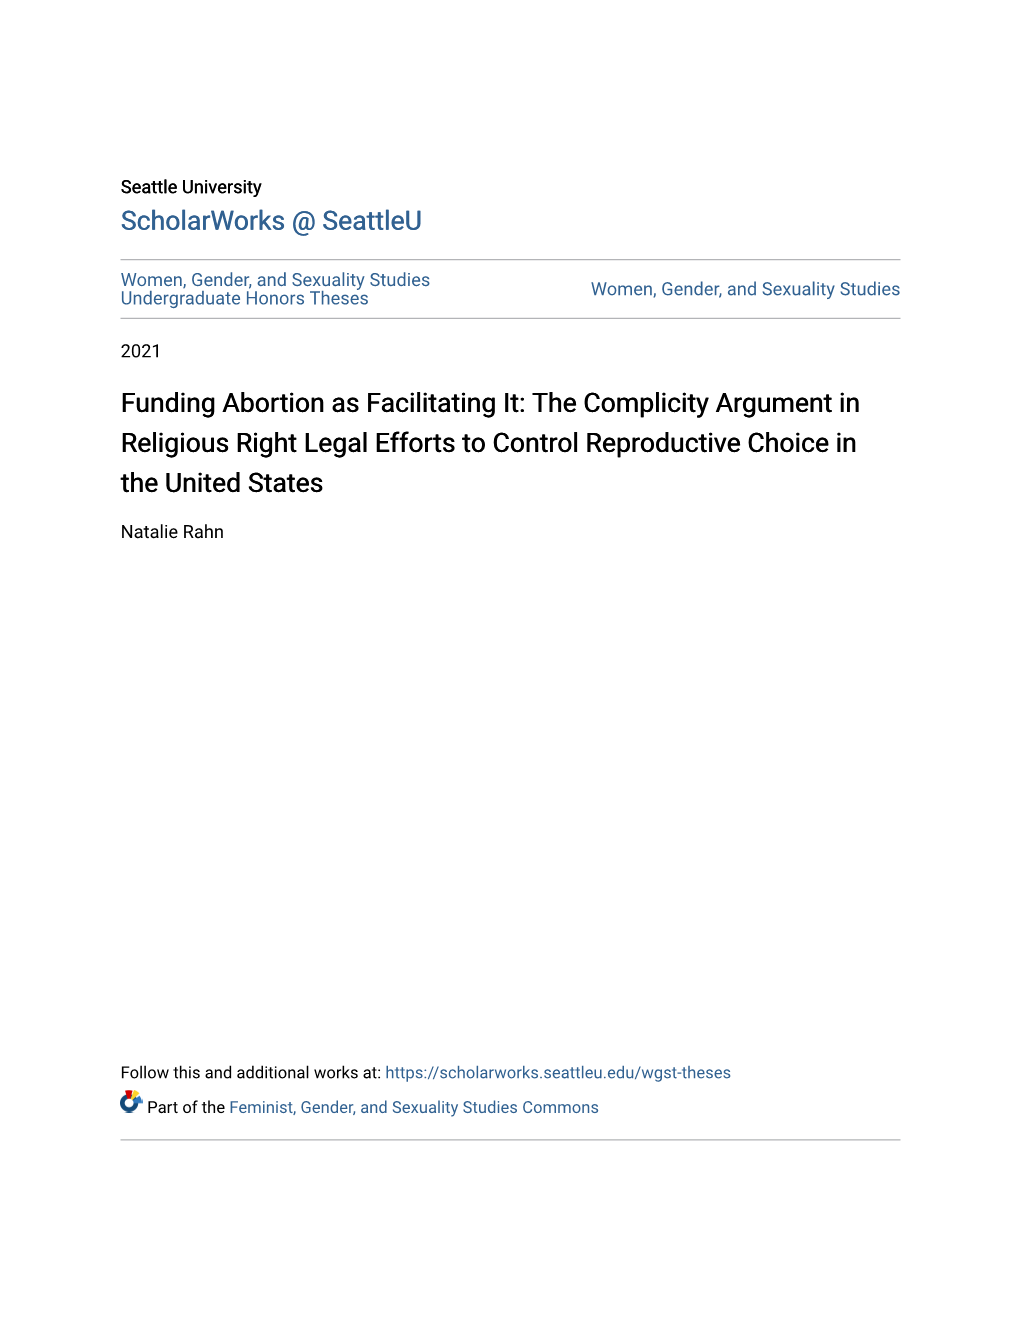 Funding Abortion As Facilitating It: the Complicity Argument in Religious Right Legal Efforts to Control Reproductive Choice in the United States